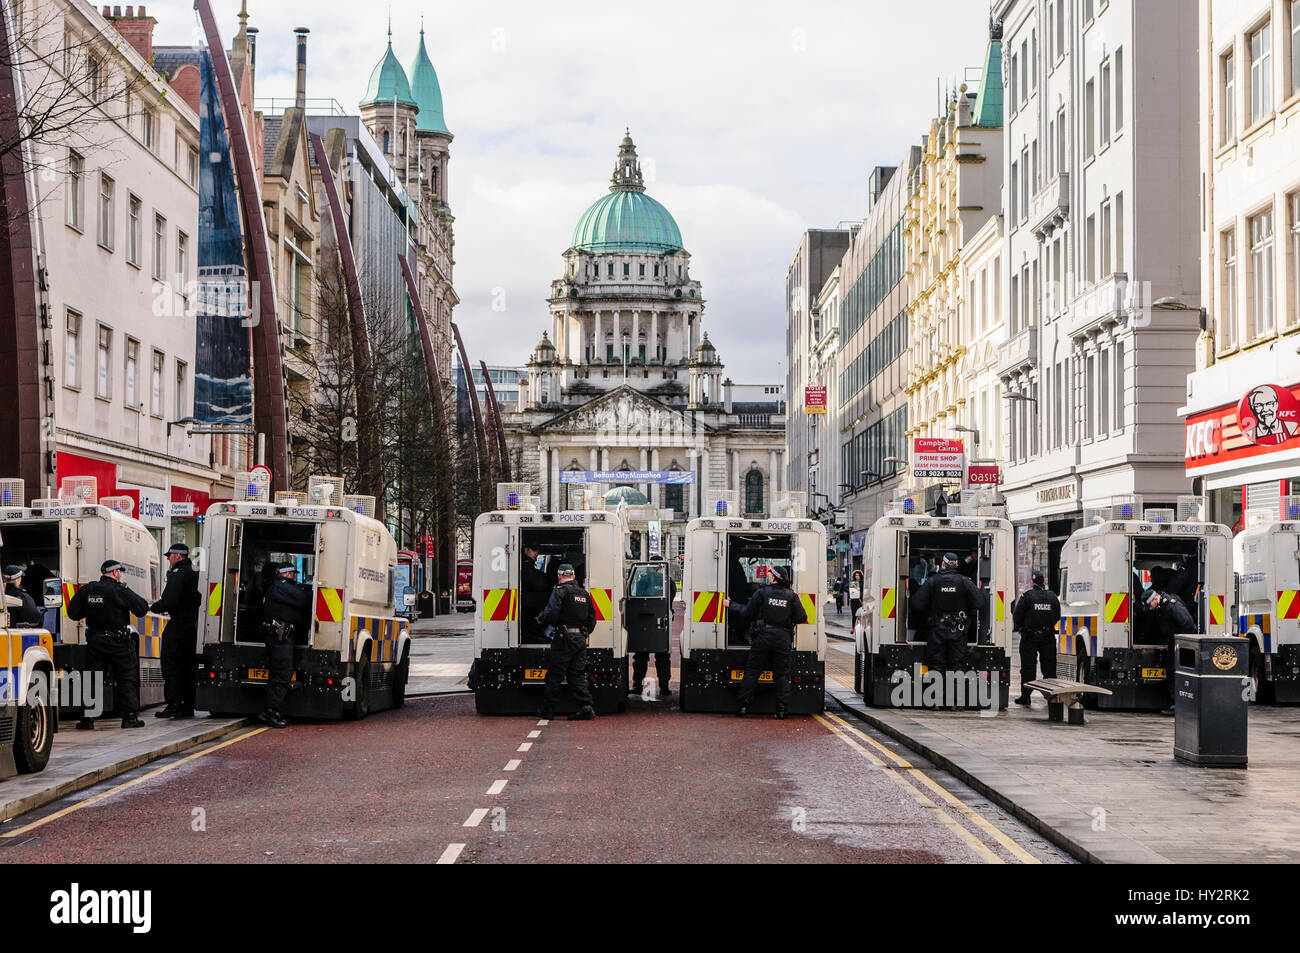 BELFAST, NORTHERN IRELAND: APR 24 2016 - A large number of PSNI Police officers and armoured Landrovers prevent people proceeding up Donegal Place in advance of a Republican Parade passing through Belfast City Centre to commemorate the 100th anniversary of the Irish Easter Rising. Stock Photo